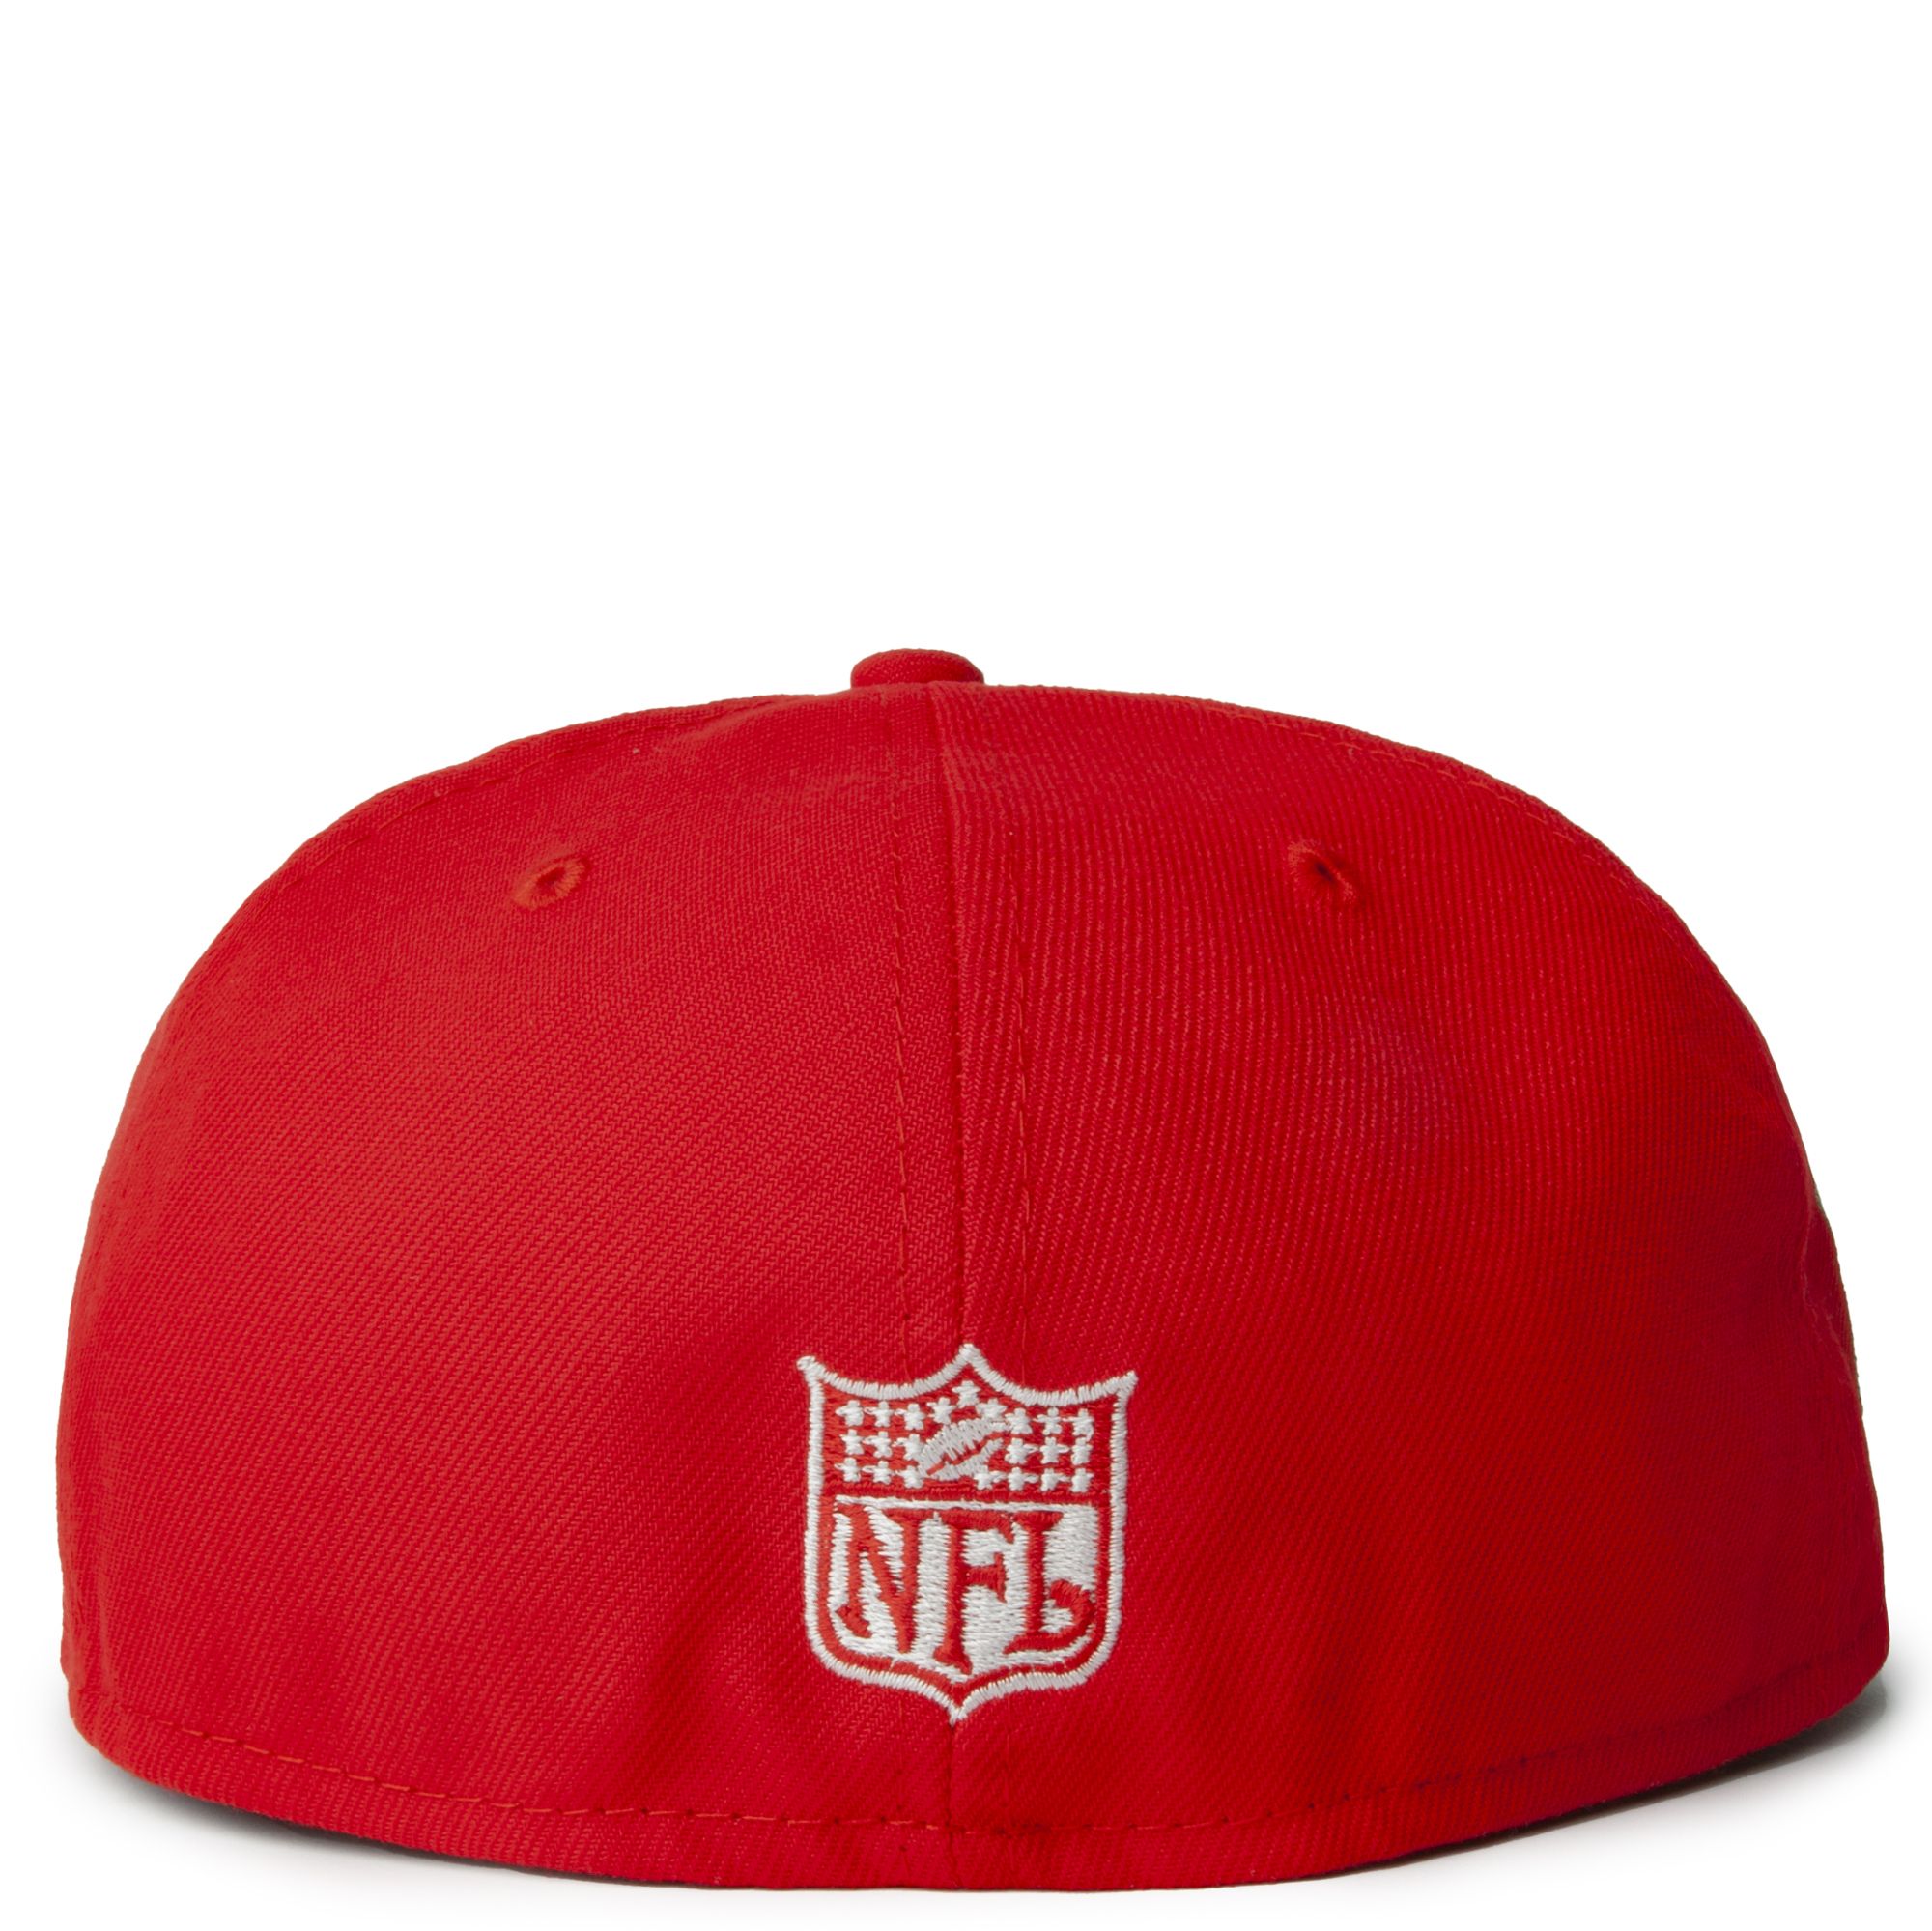 NEW ERA CAPS San Francisco 49ers Super Bowl XXIV 59FIFTY Fitted Hat 70715363  - Shiekh